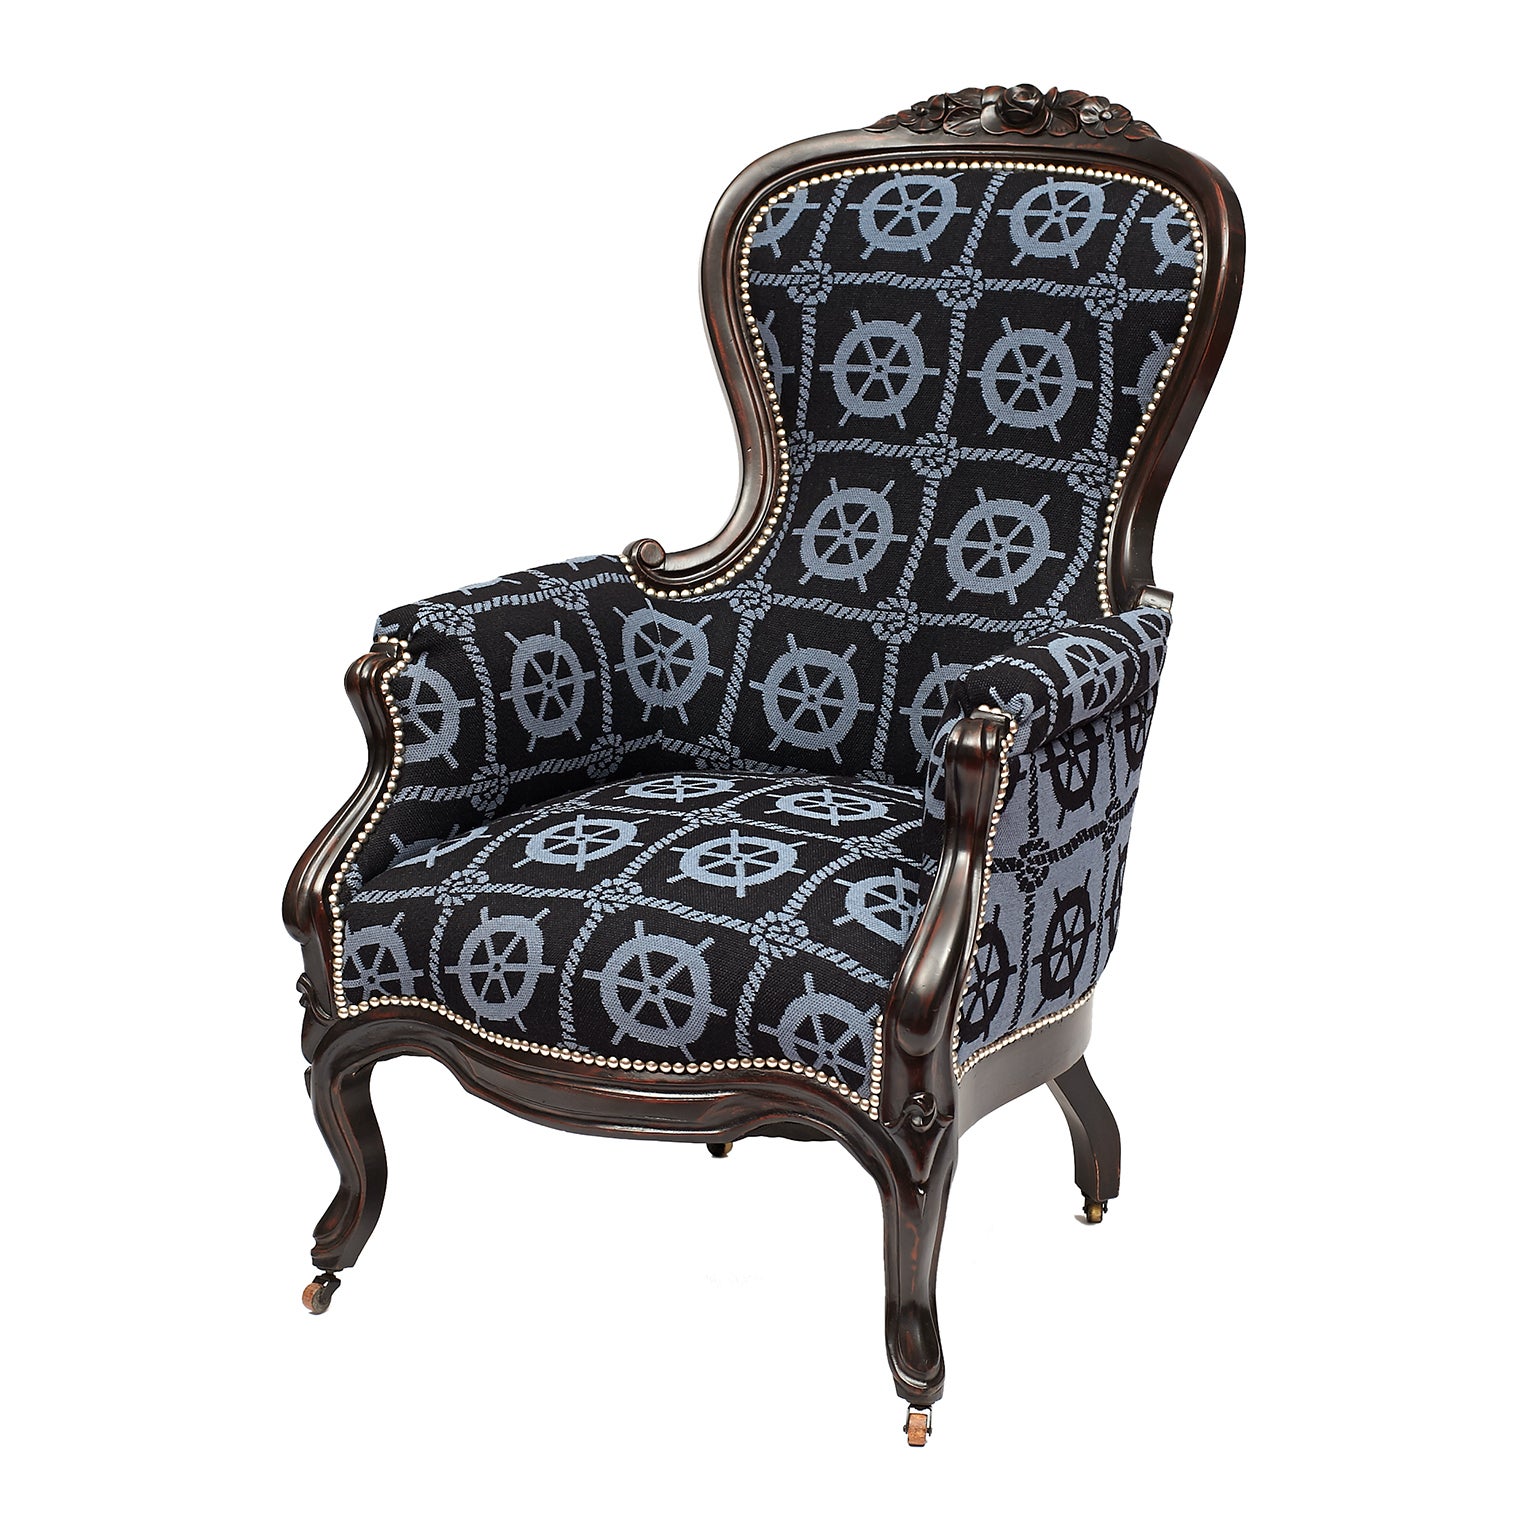 19th c. Victorian Captain's Lounge Chair